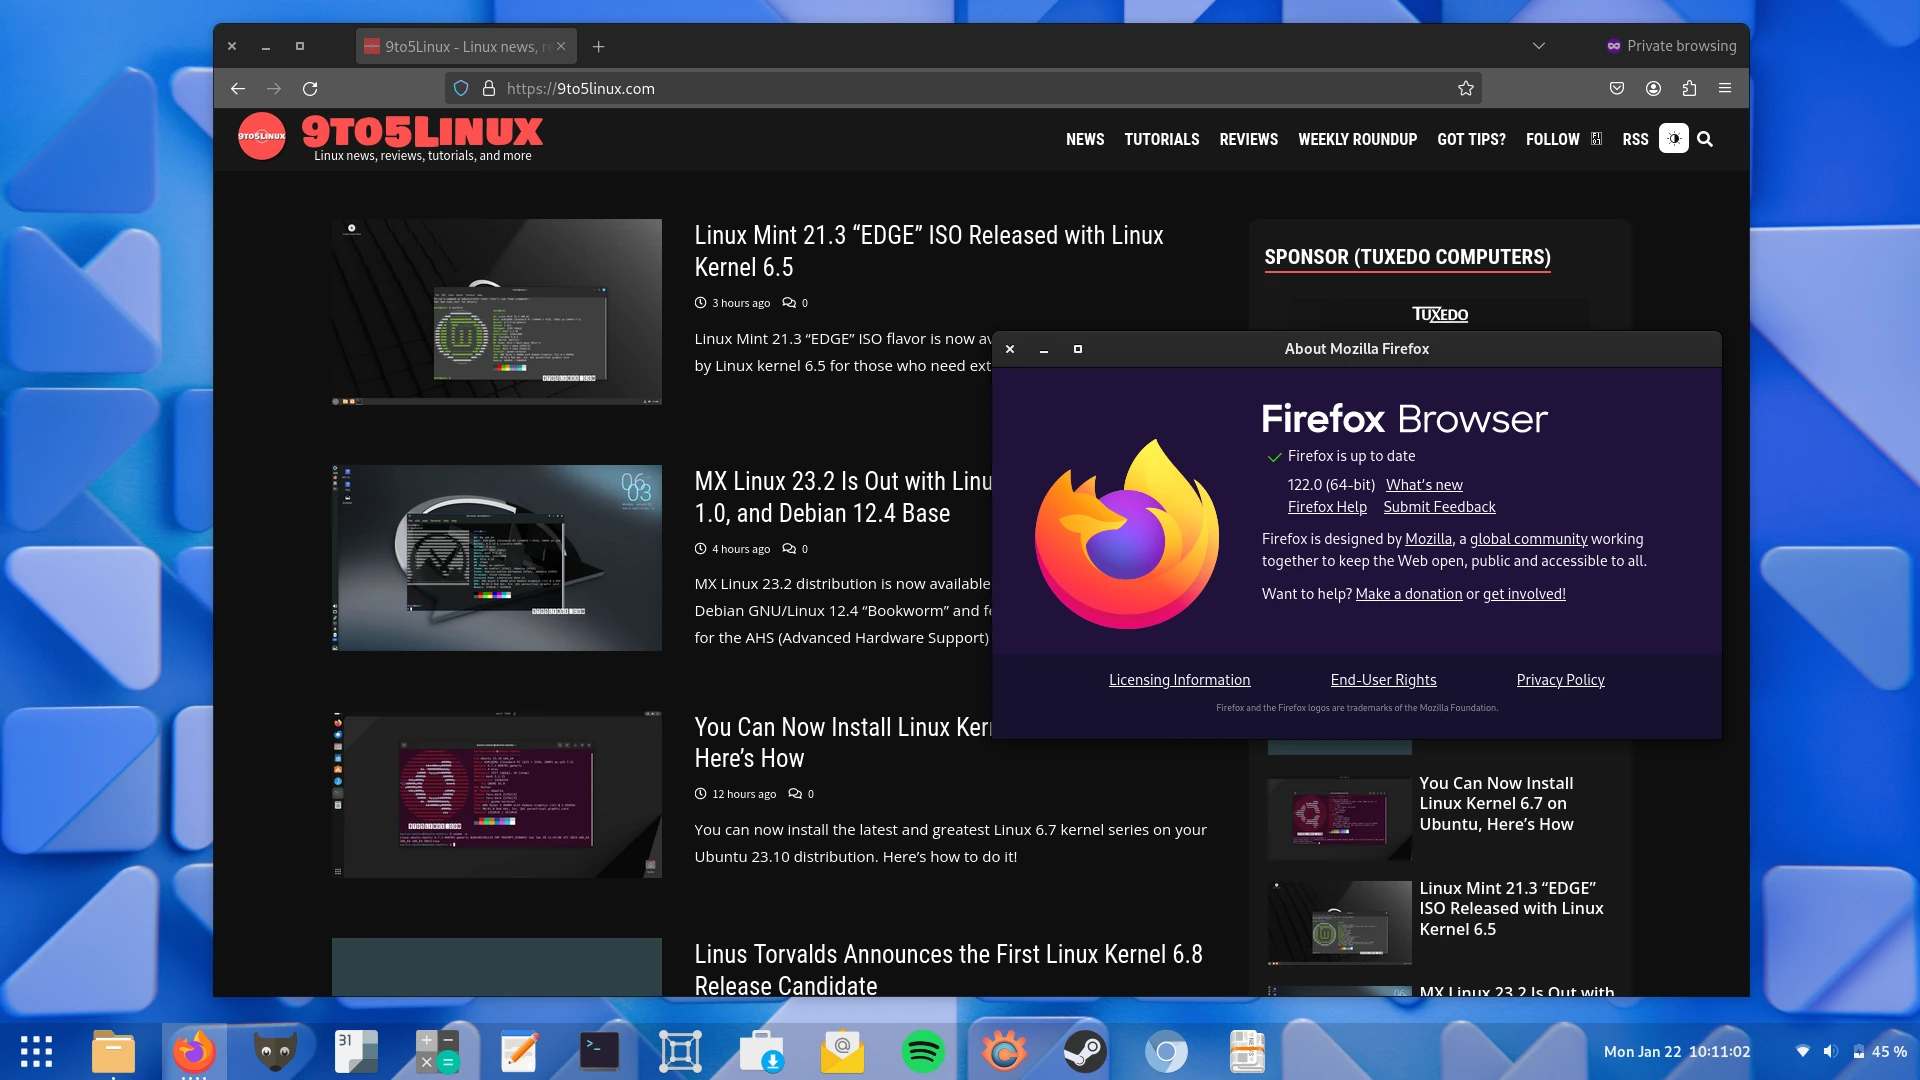 Mozilla Firefox 122 Is Now Available for Download, Here’s What’s New